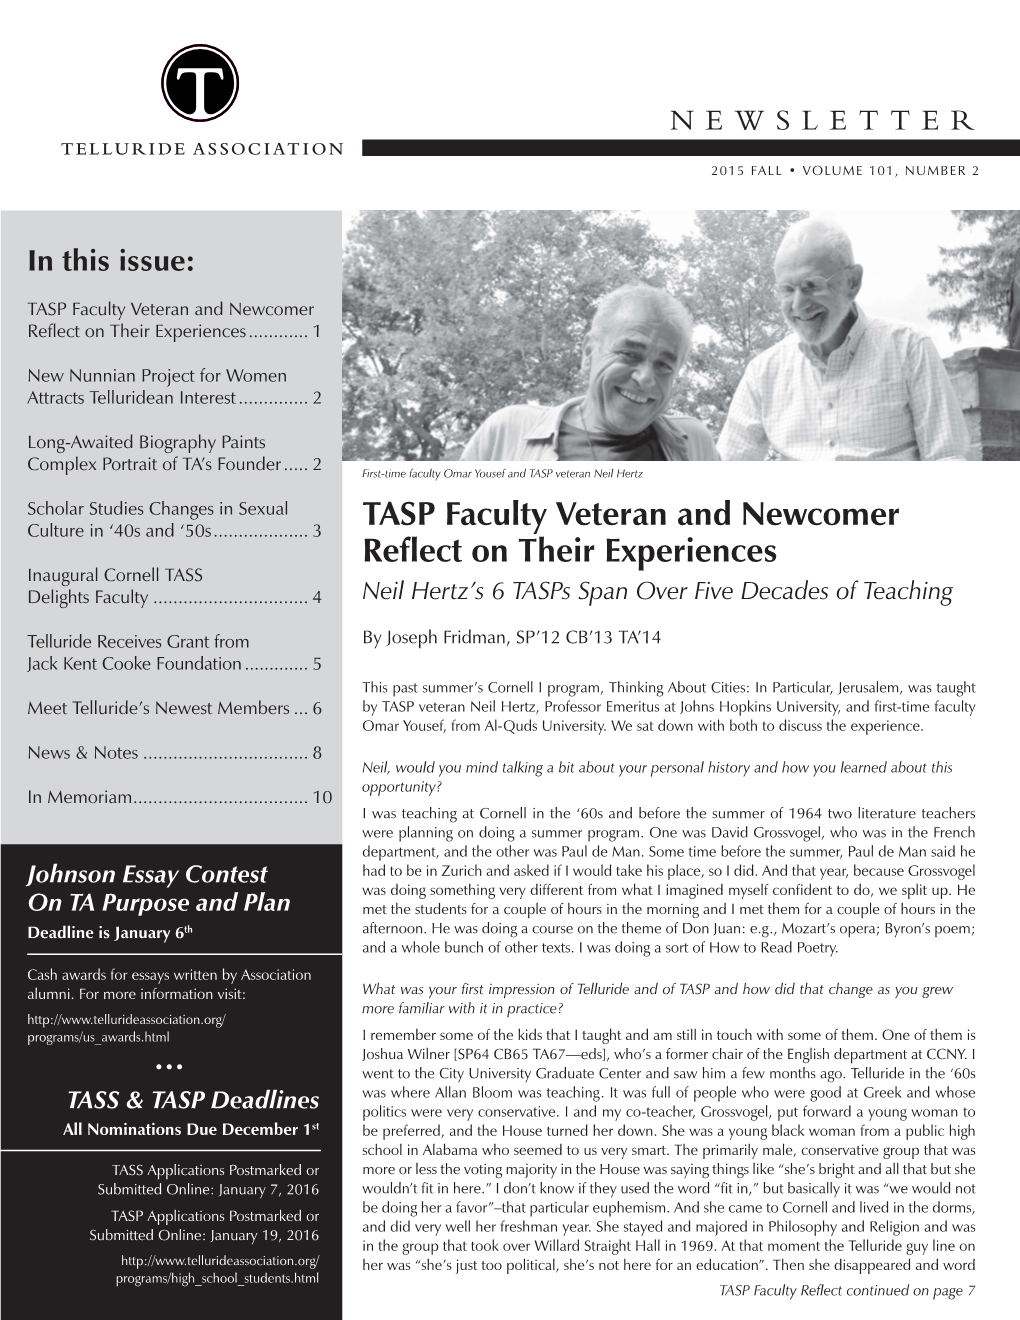 TASP Faculty Veteran and Newcomer Reflect on Their Experiences